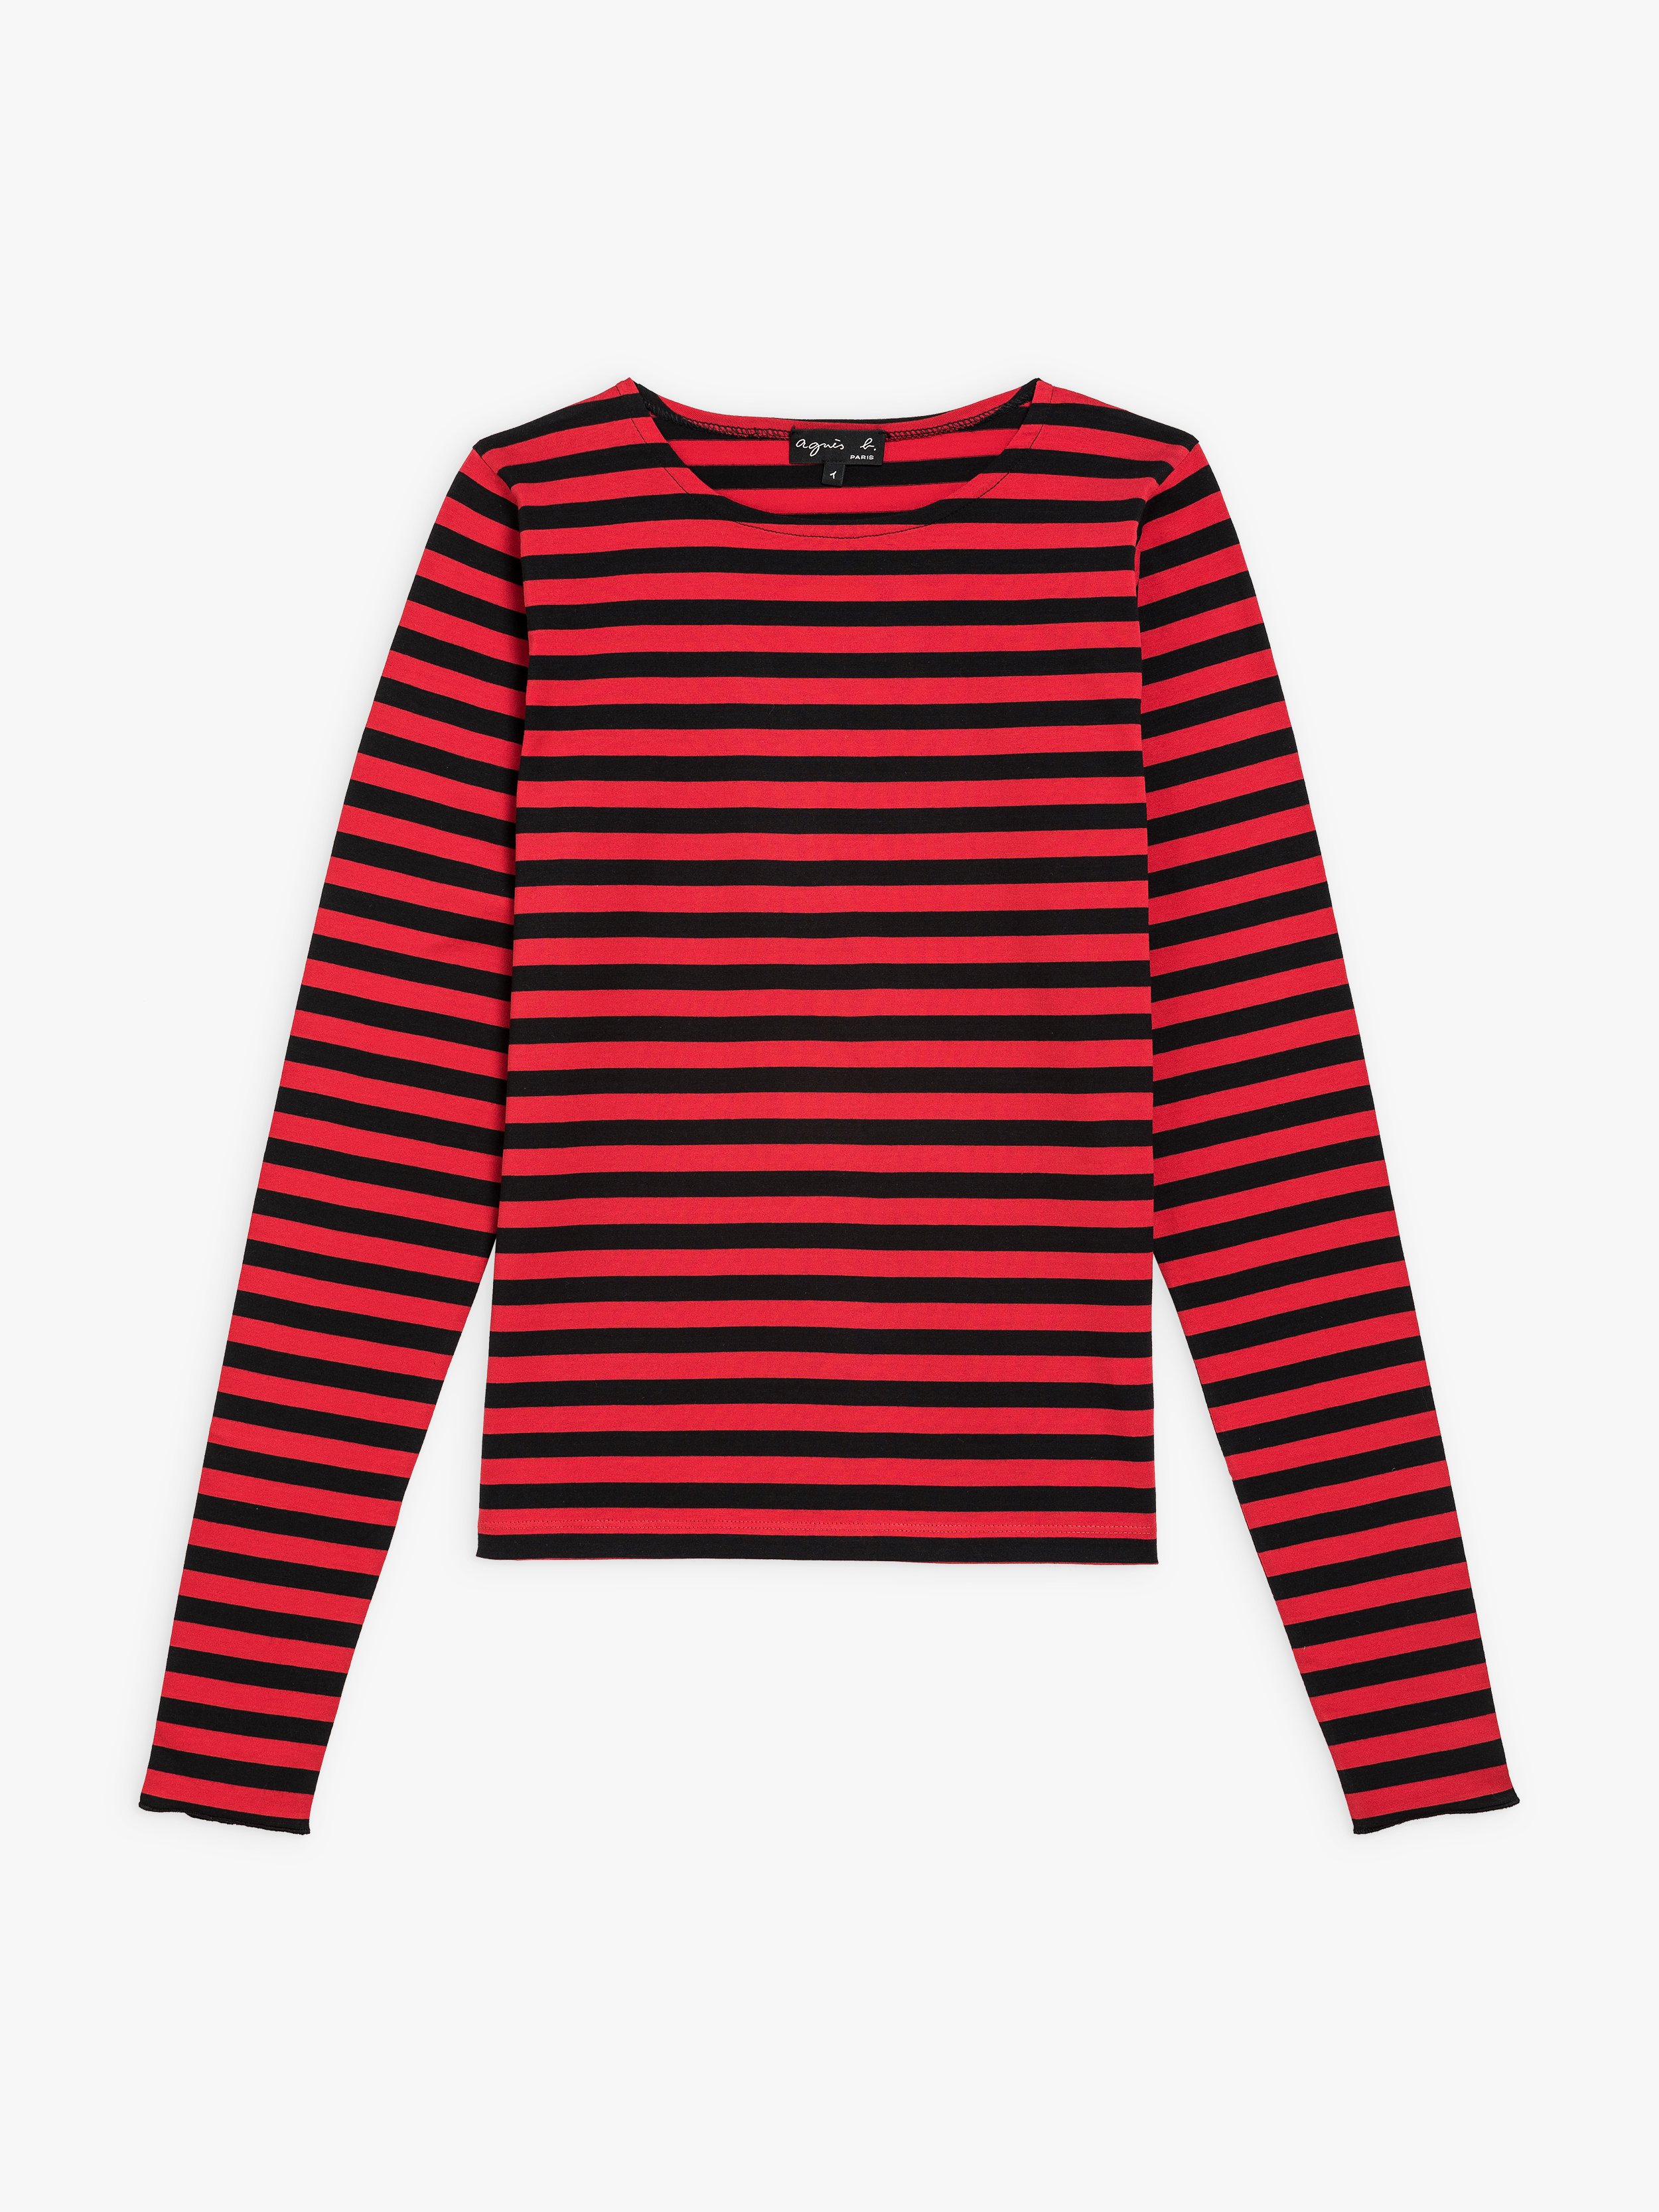 red striped long sleeve shirt